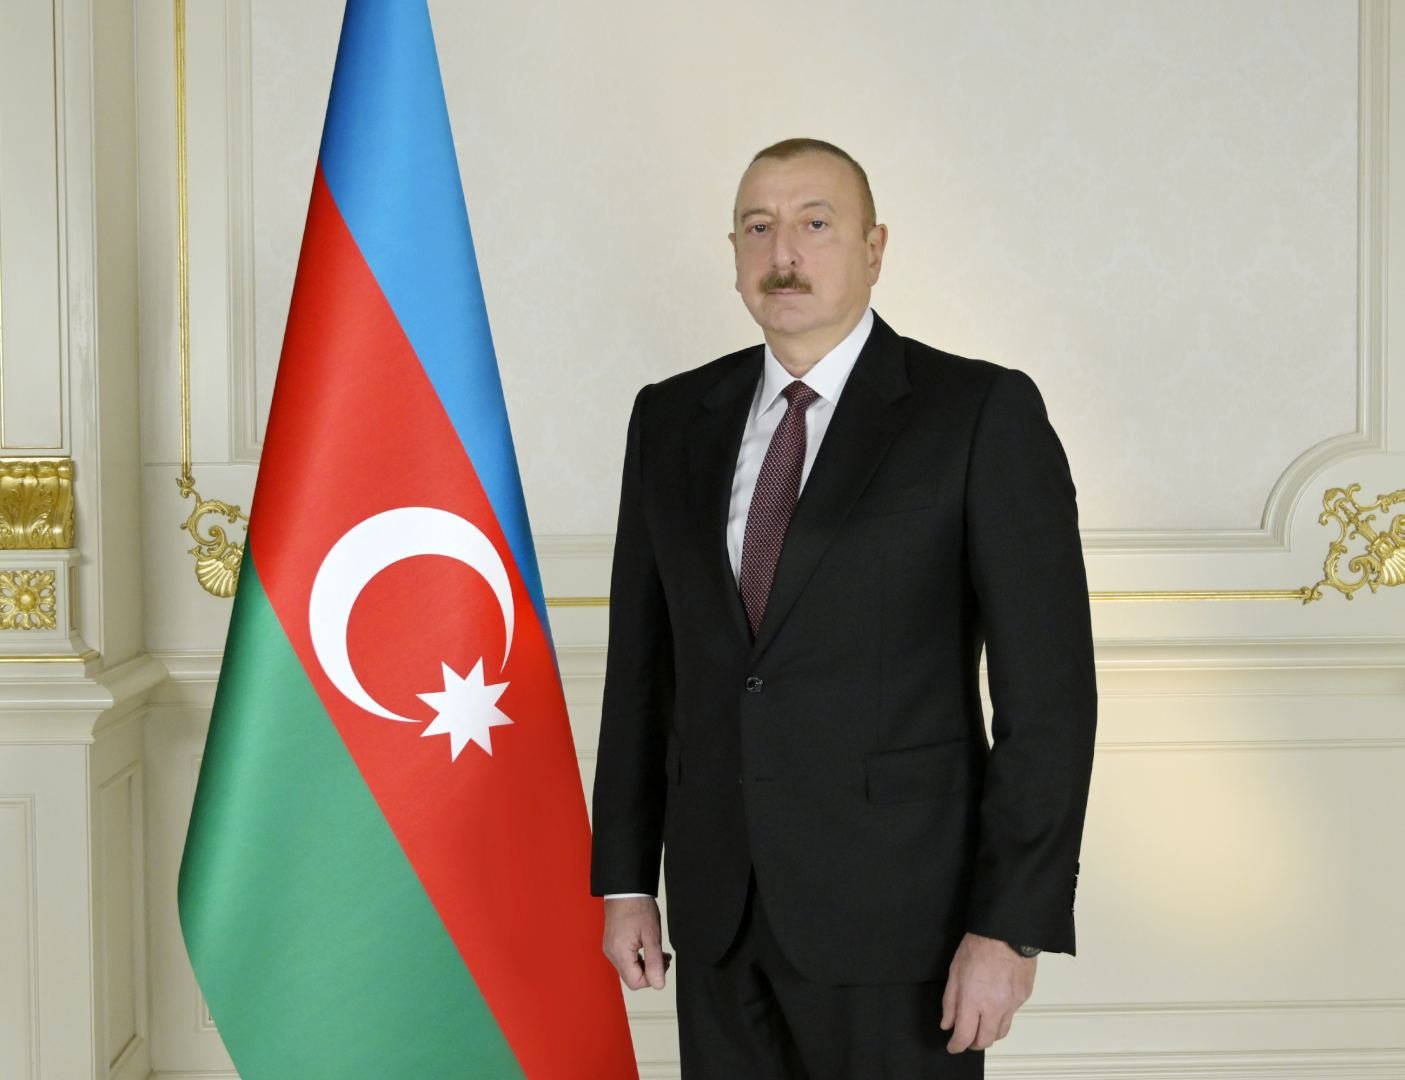 President Ilham Aliyev participates in enlarged session of Supreme Eurasian Economic Council